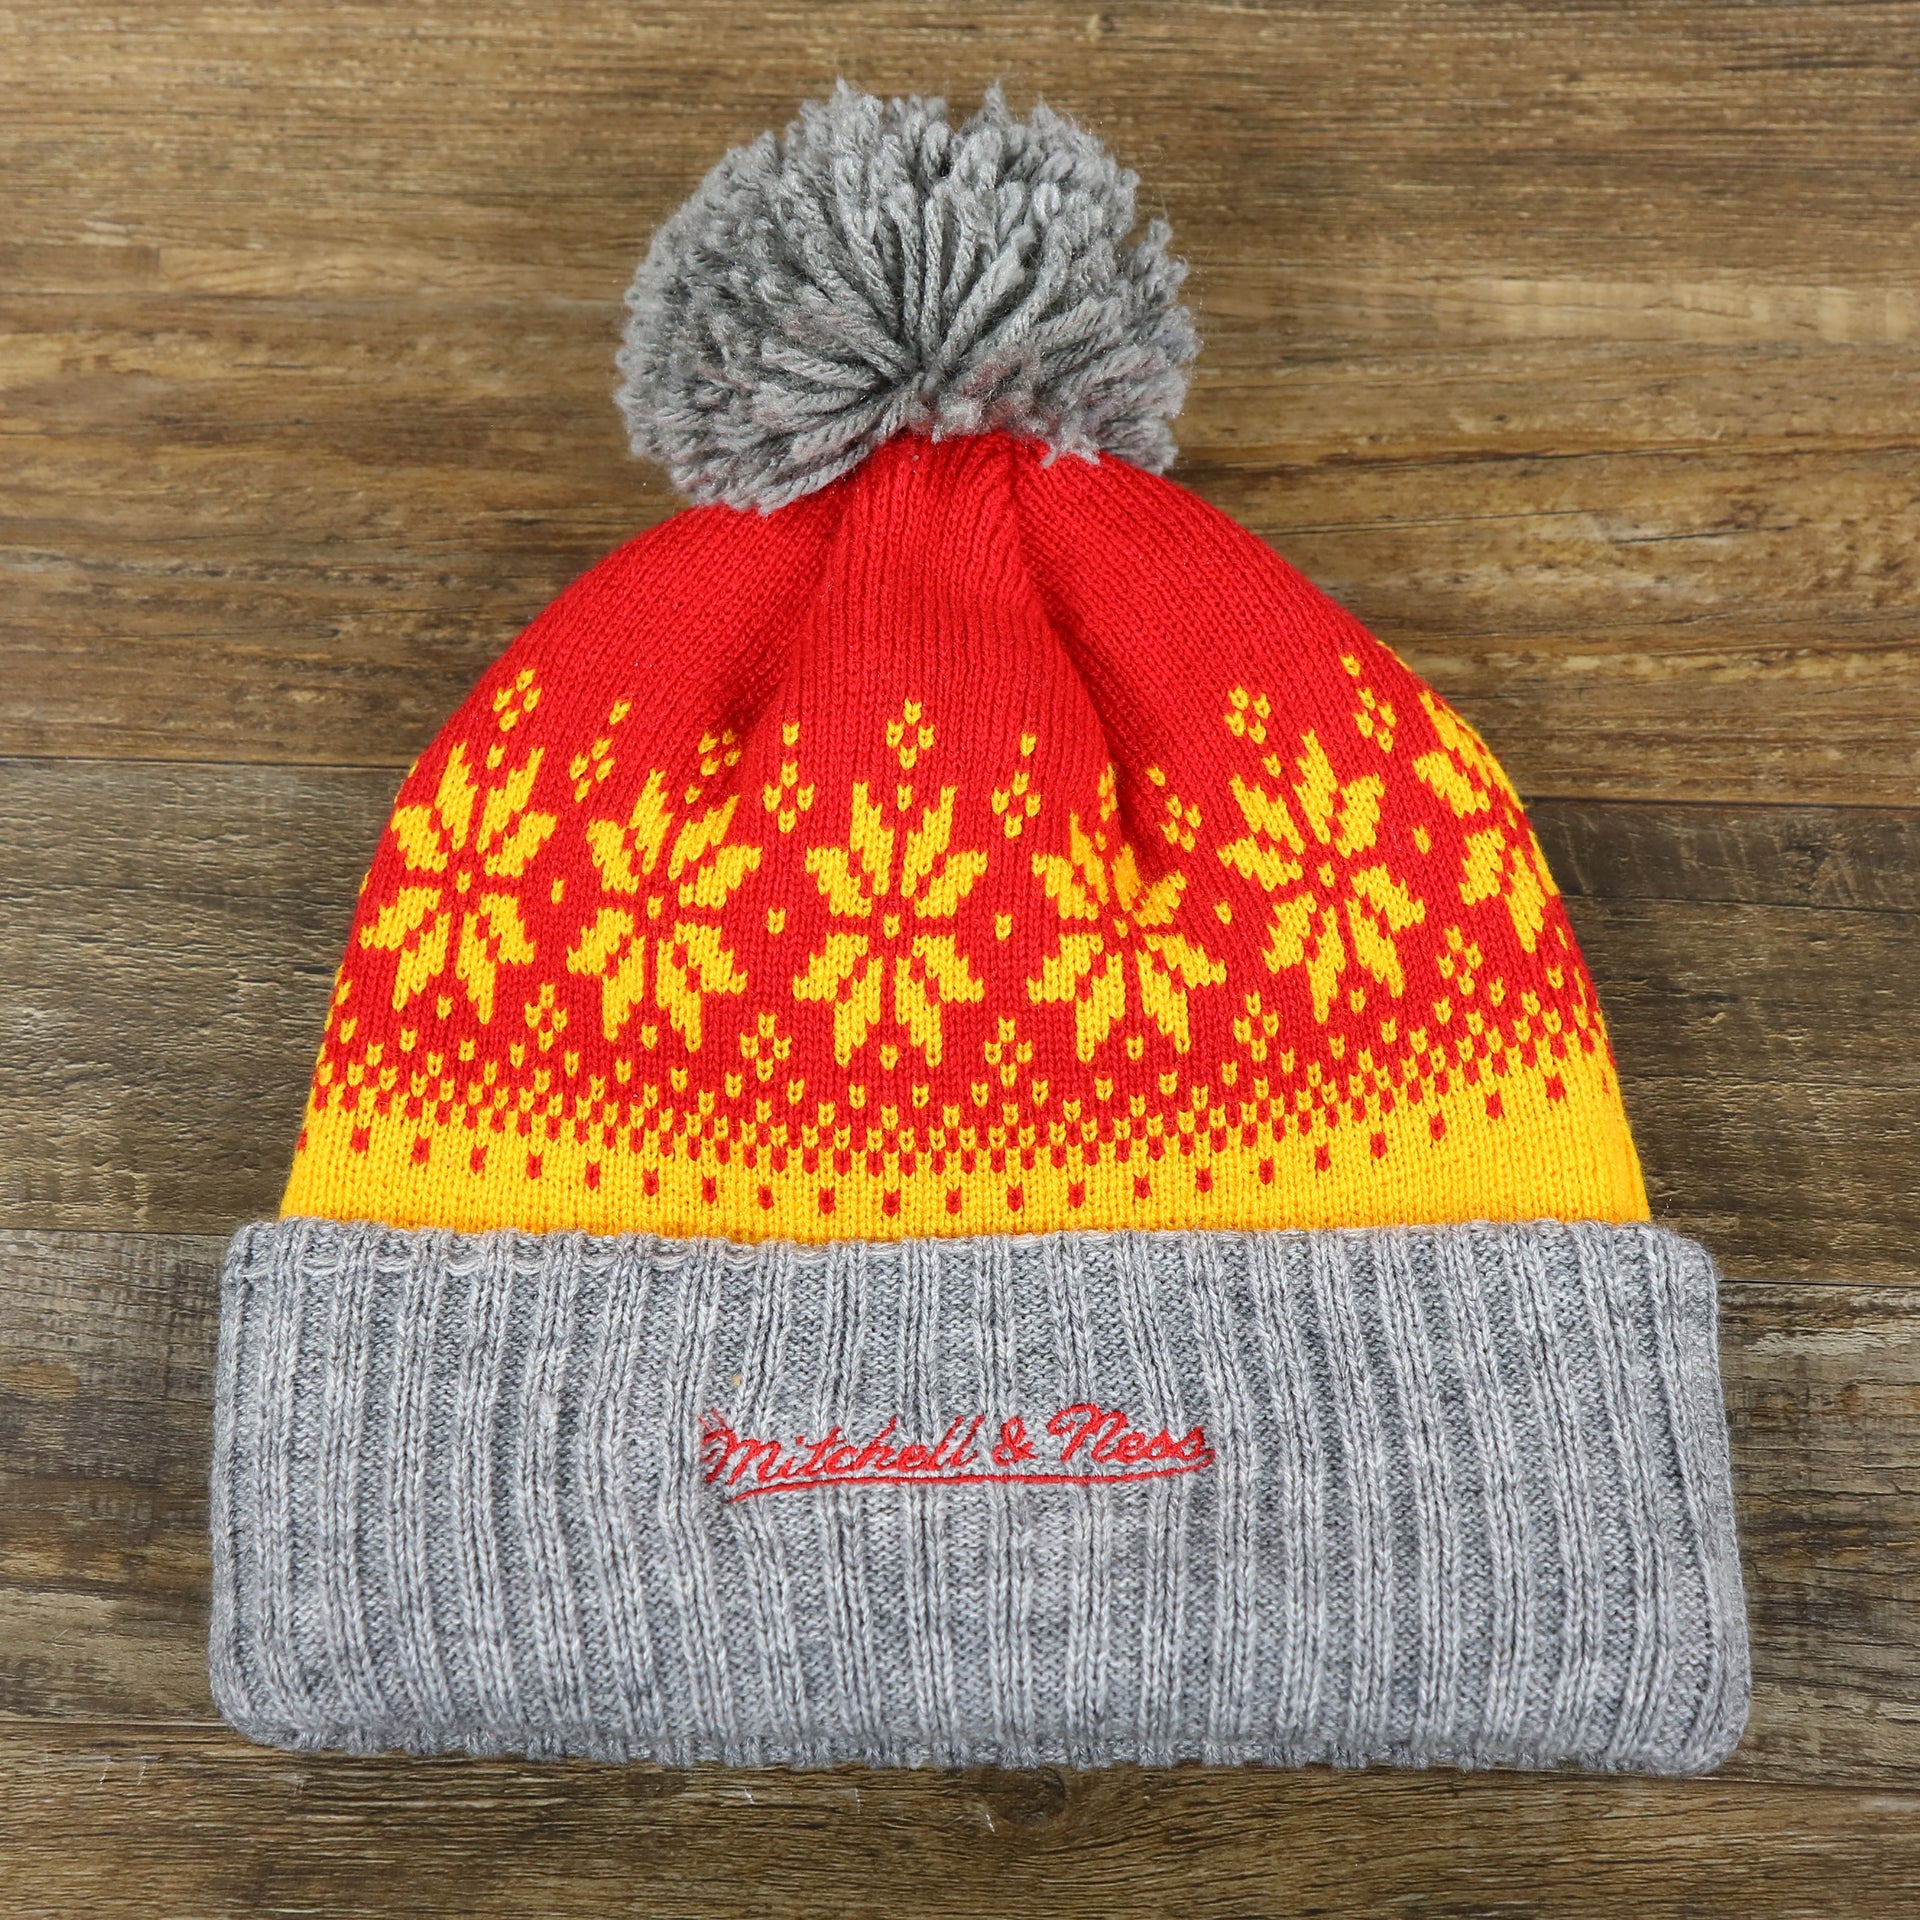 the backside of the Retro Houston Rockets Arctic Snowflake Ugly Sweater Pattern Cuffed Beanie With Pom Pom | Yellow, Maroon, and Gray Winter Beanie